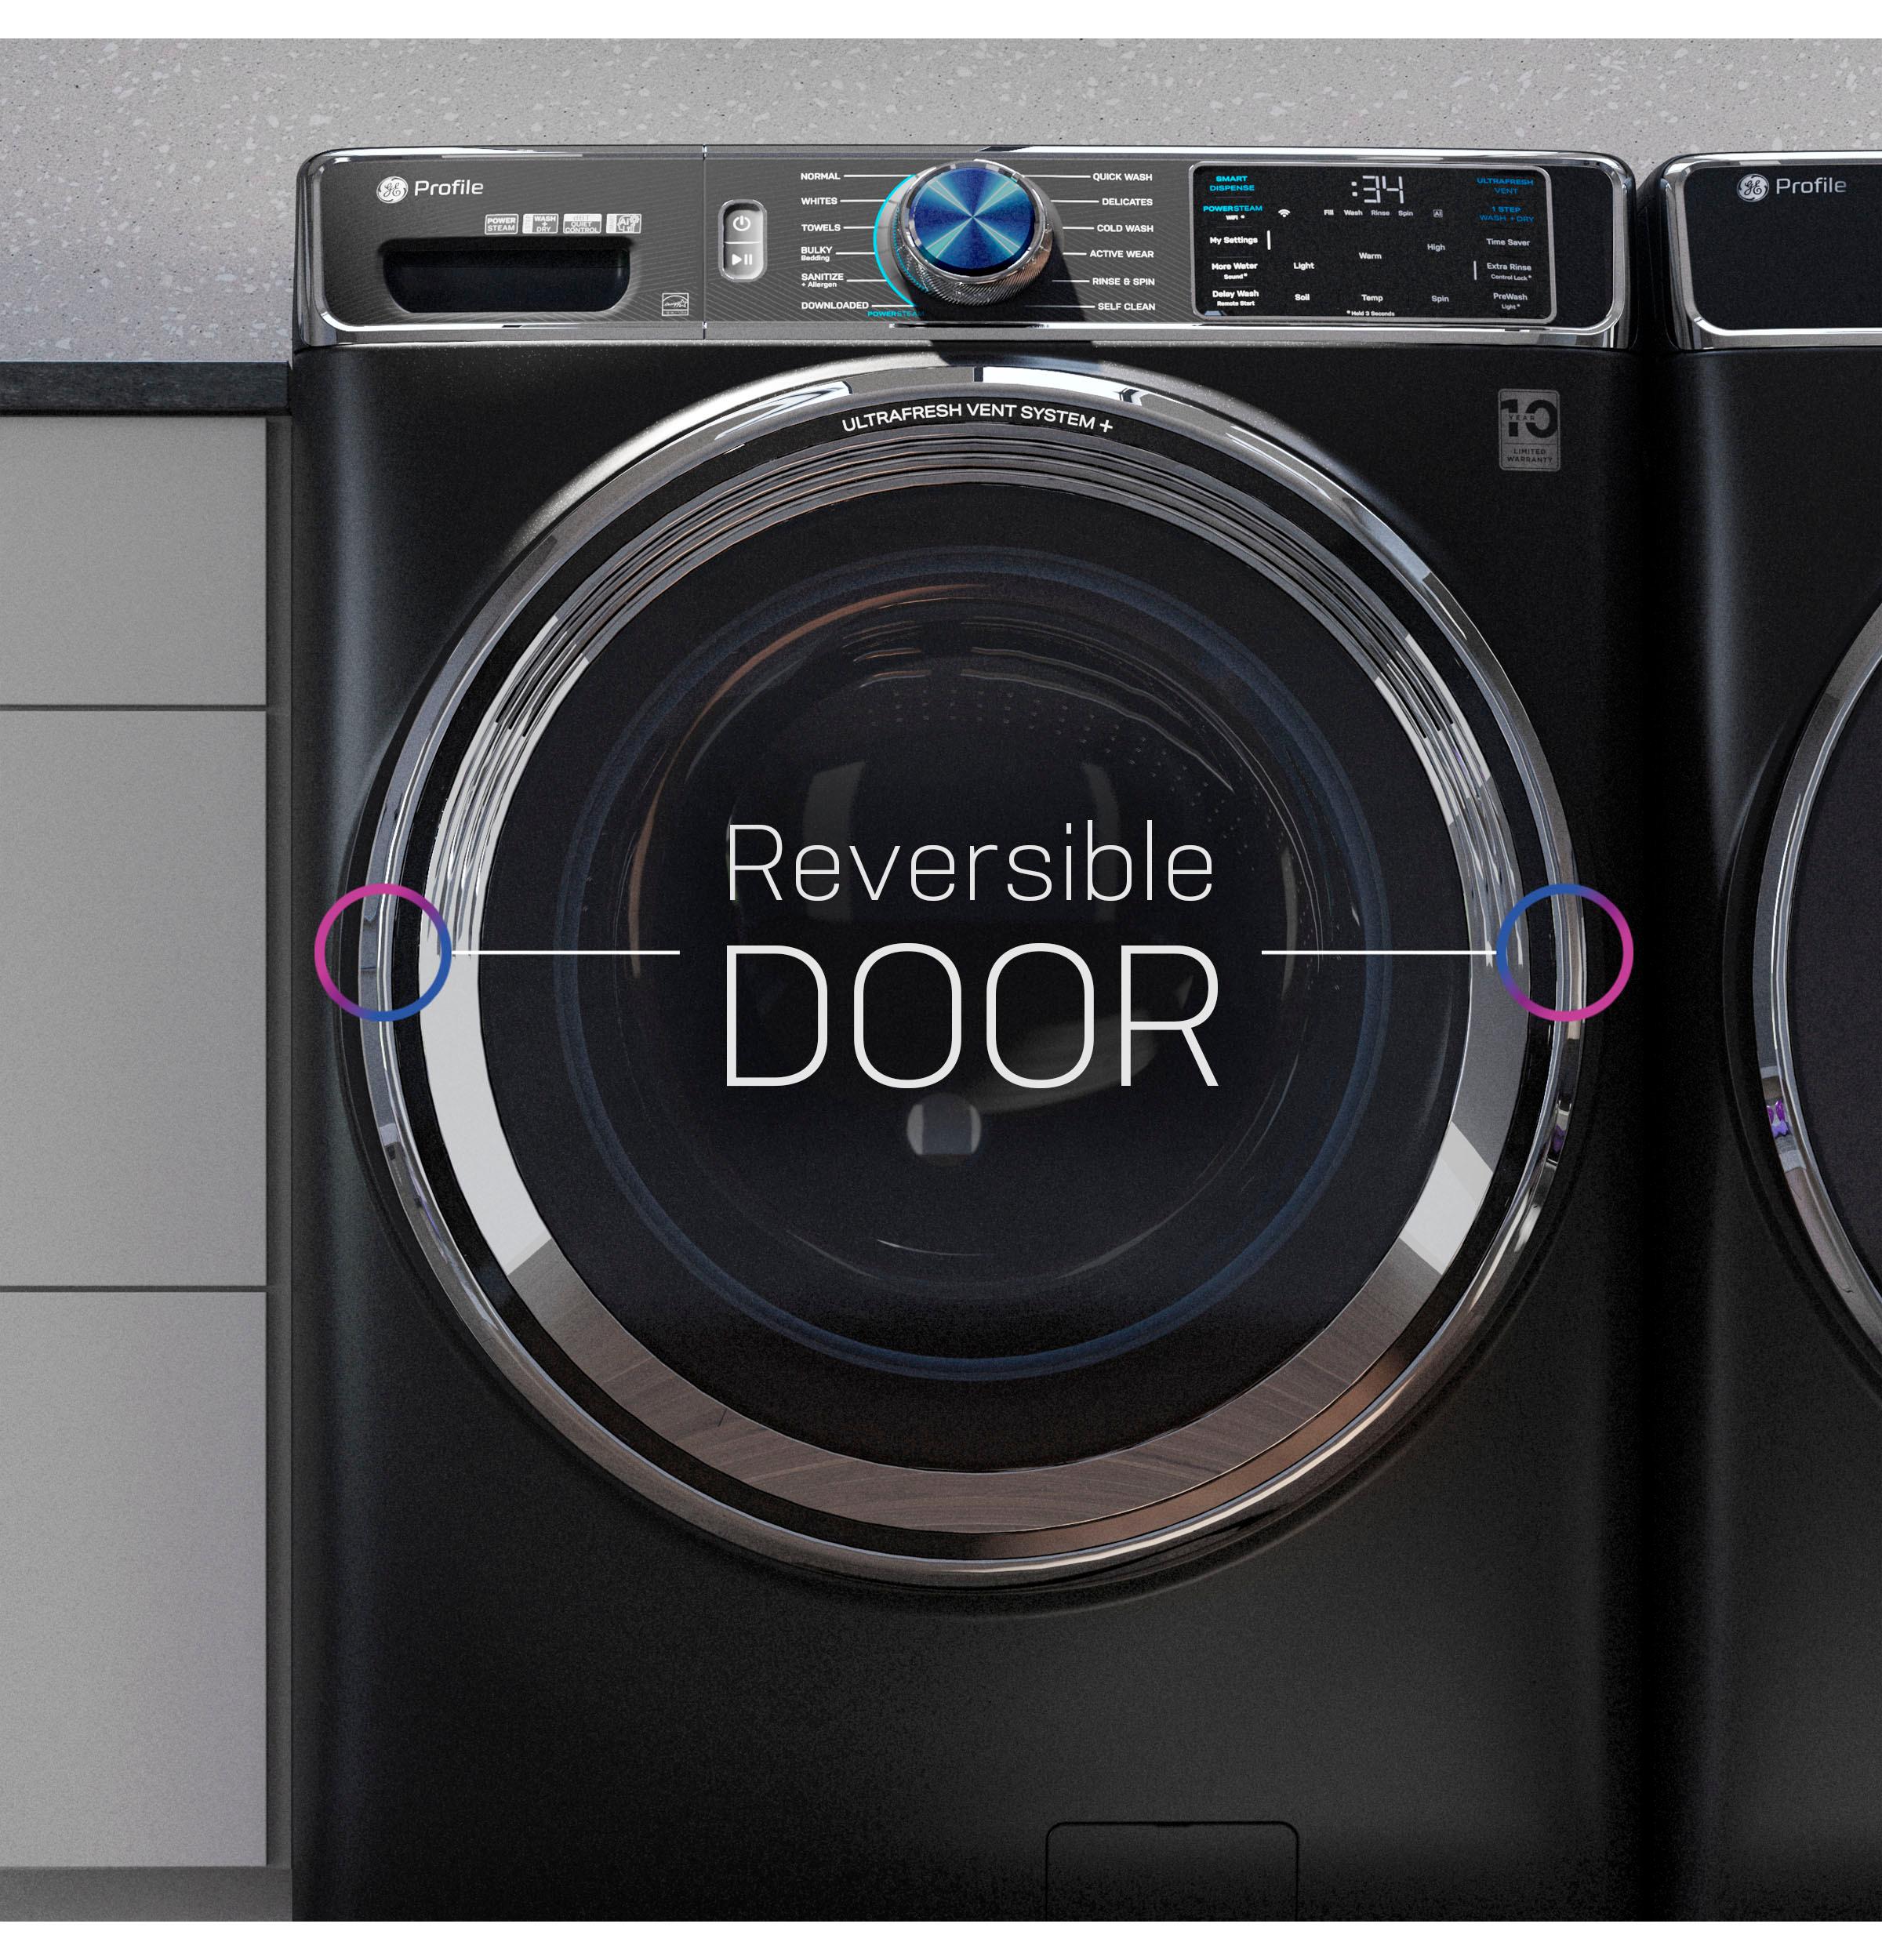 GE Profile™ 5.3 cu. ft. Capacity Smart Front Load ENERGY STAR® Washer with UltraFresh™ Vent System  with OdorBlock™